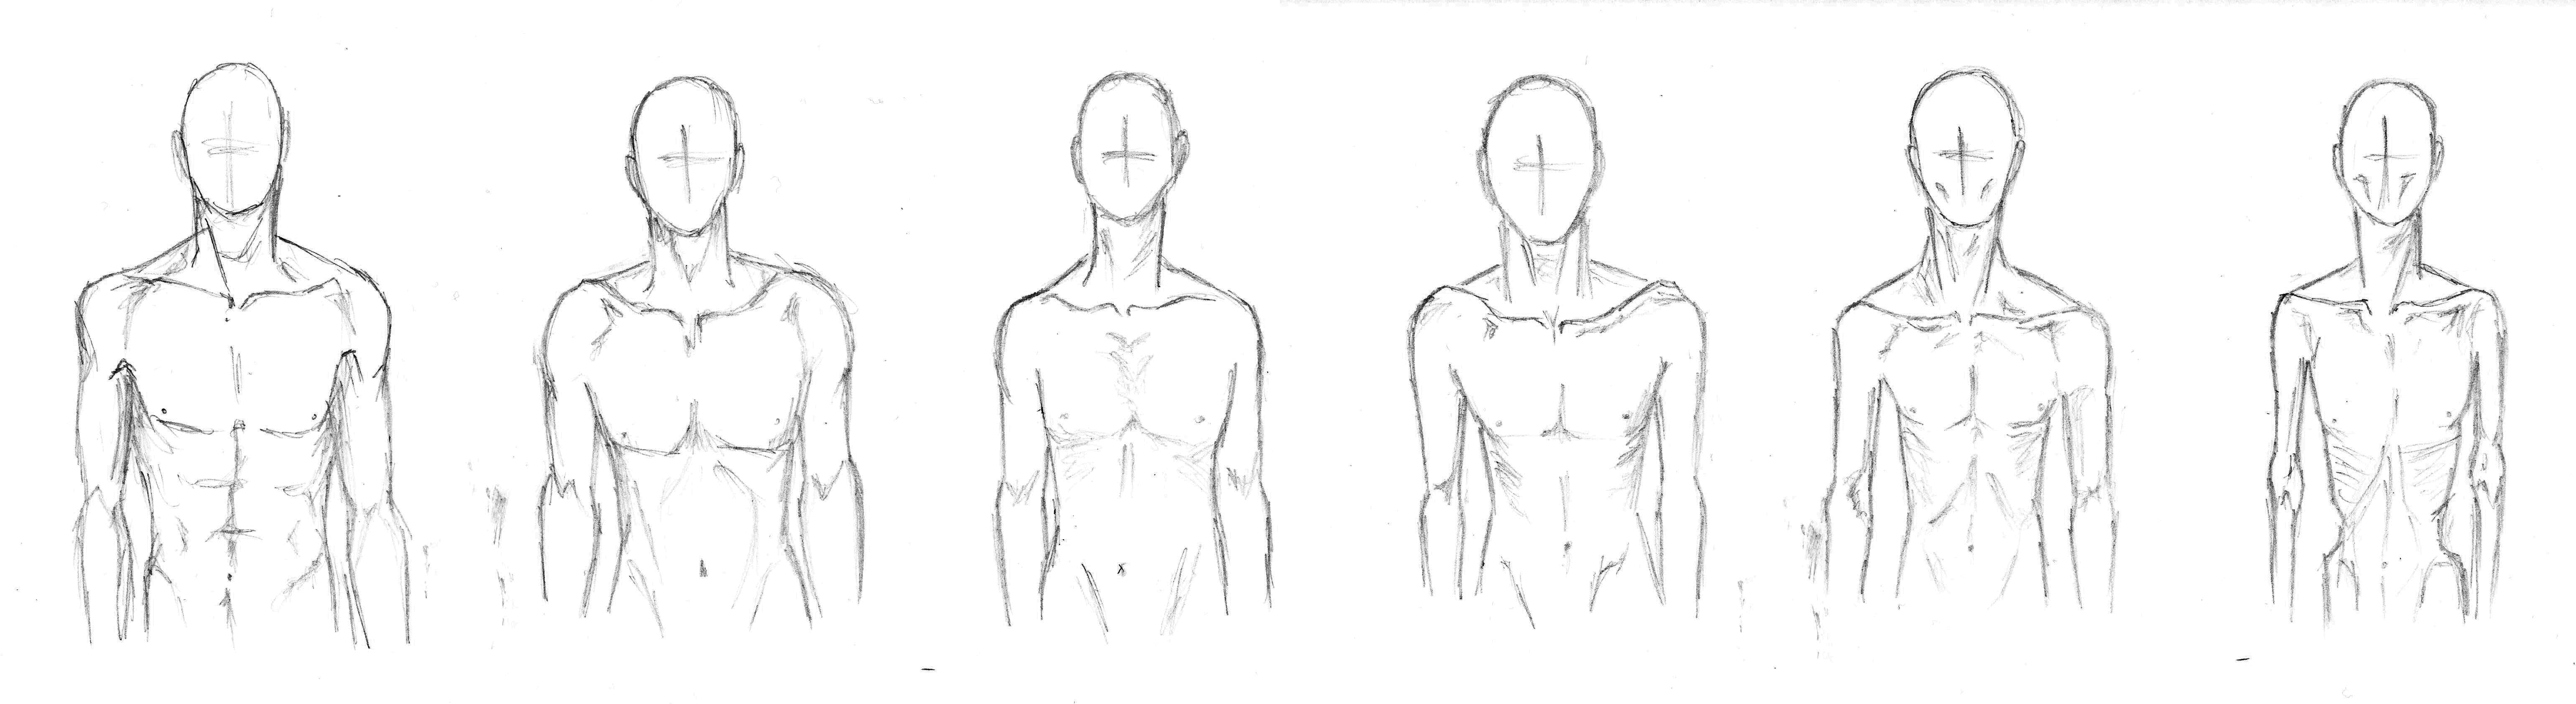 How To Draw Different Male Body Types : Body Types Shape Male Men ...